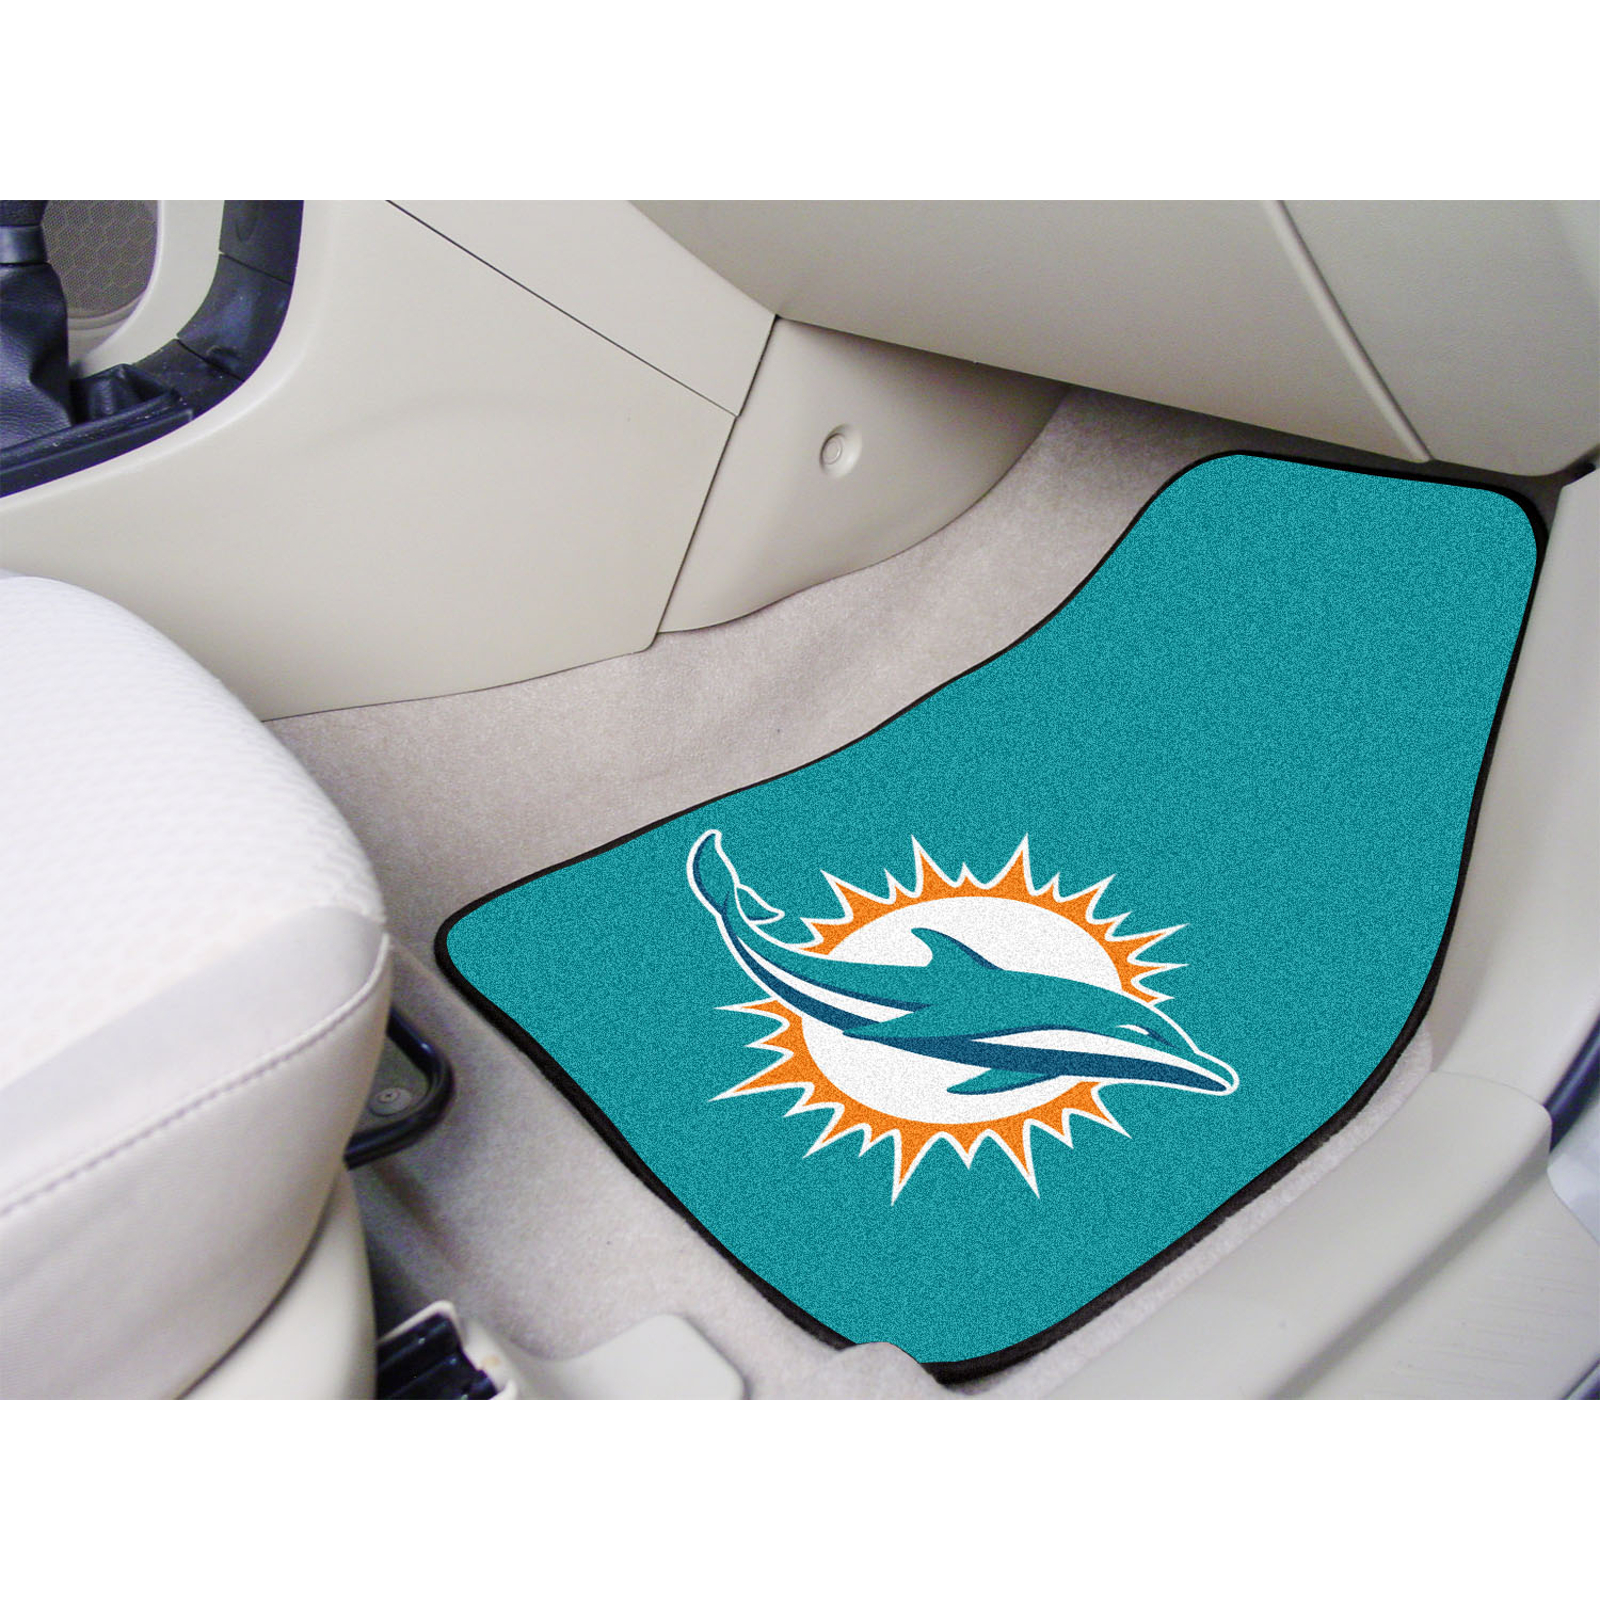 National Football League Miami Dolphins 2-piece Carpeted Car Mats 18" x 27"